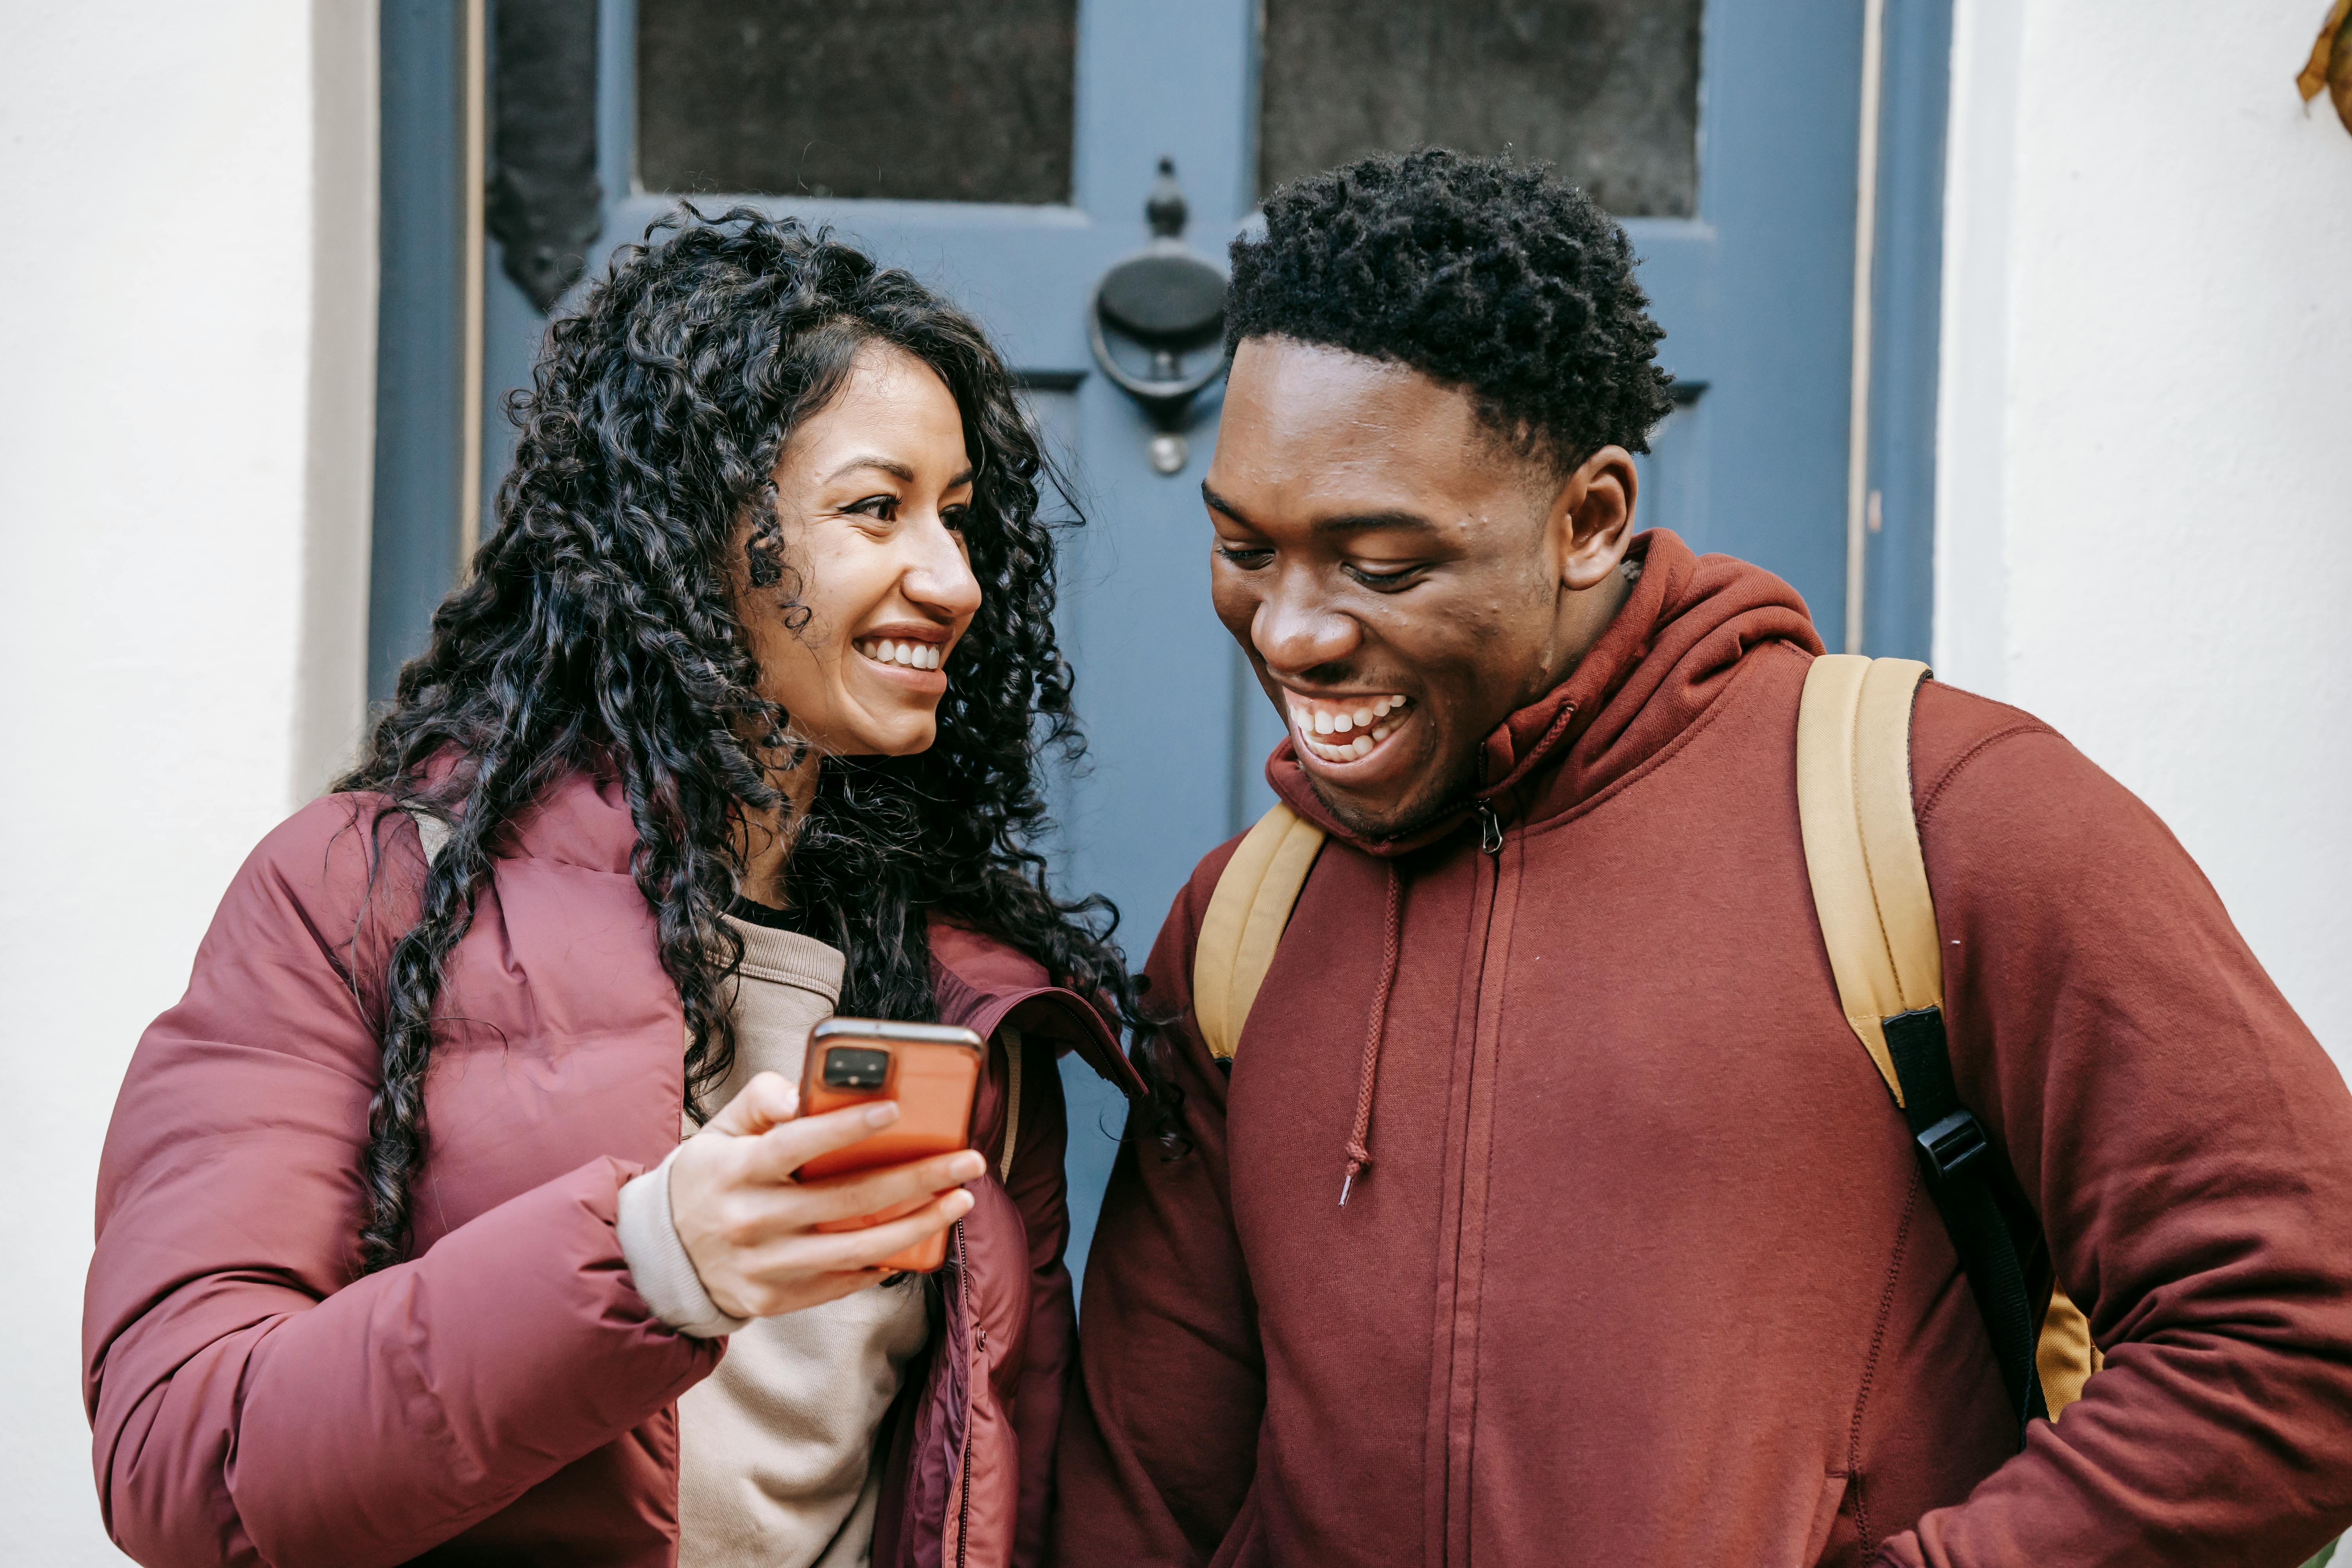 cheerful multiracial couple sharing smartphone on city street